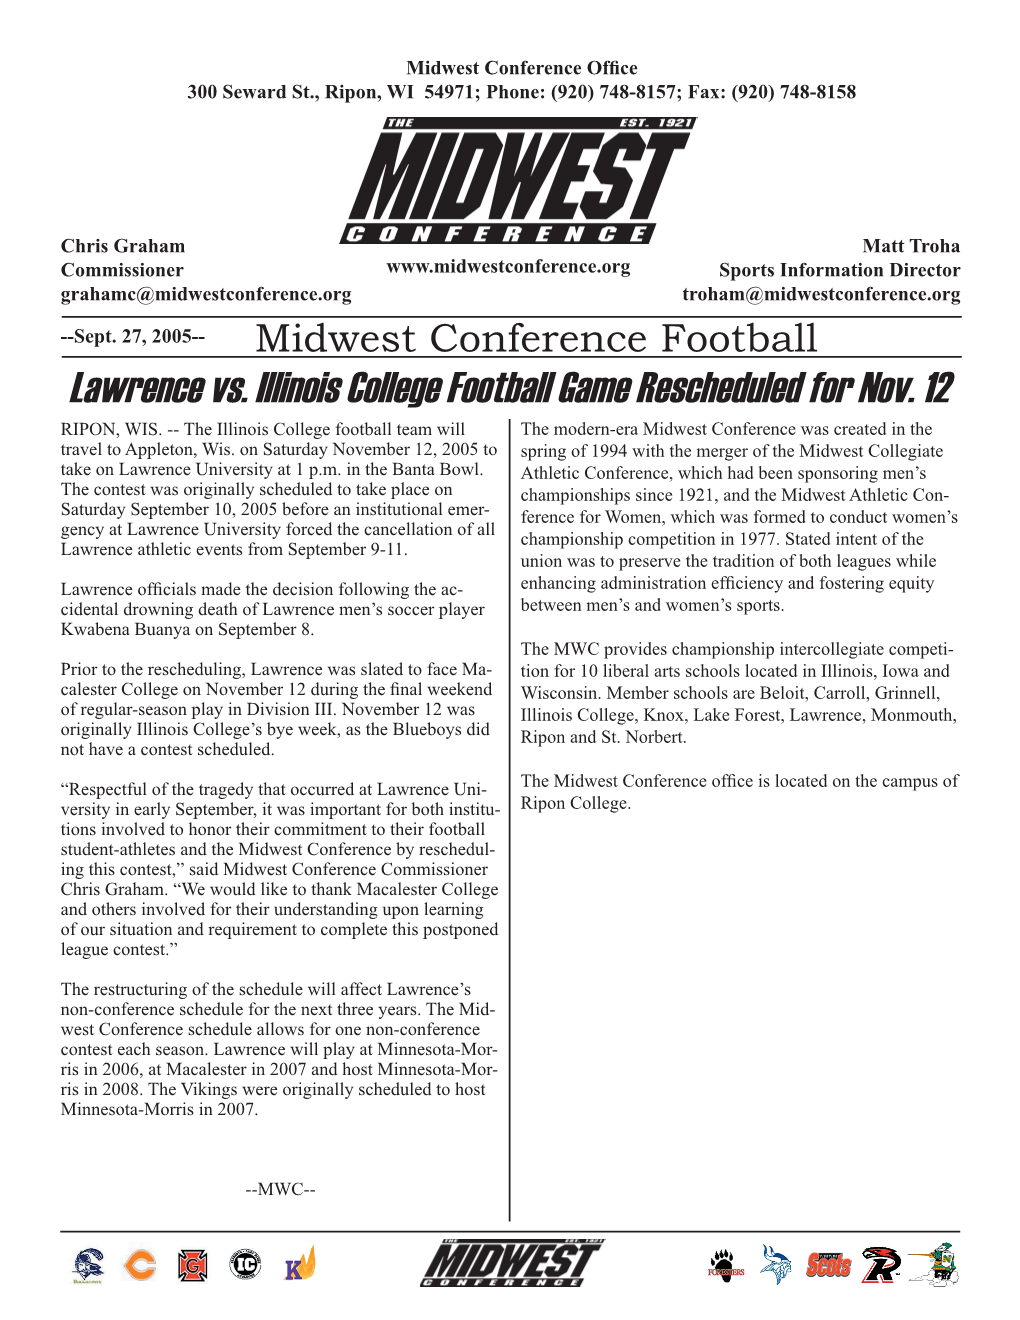 Lawrence Vs. Illinois College Football Game Rescheduled for Nov. 12 RIPON, WIS